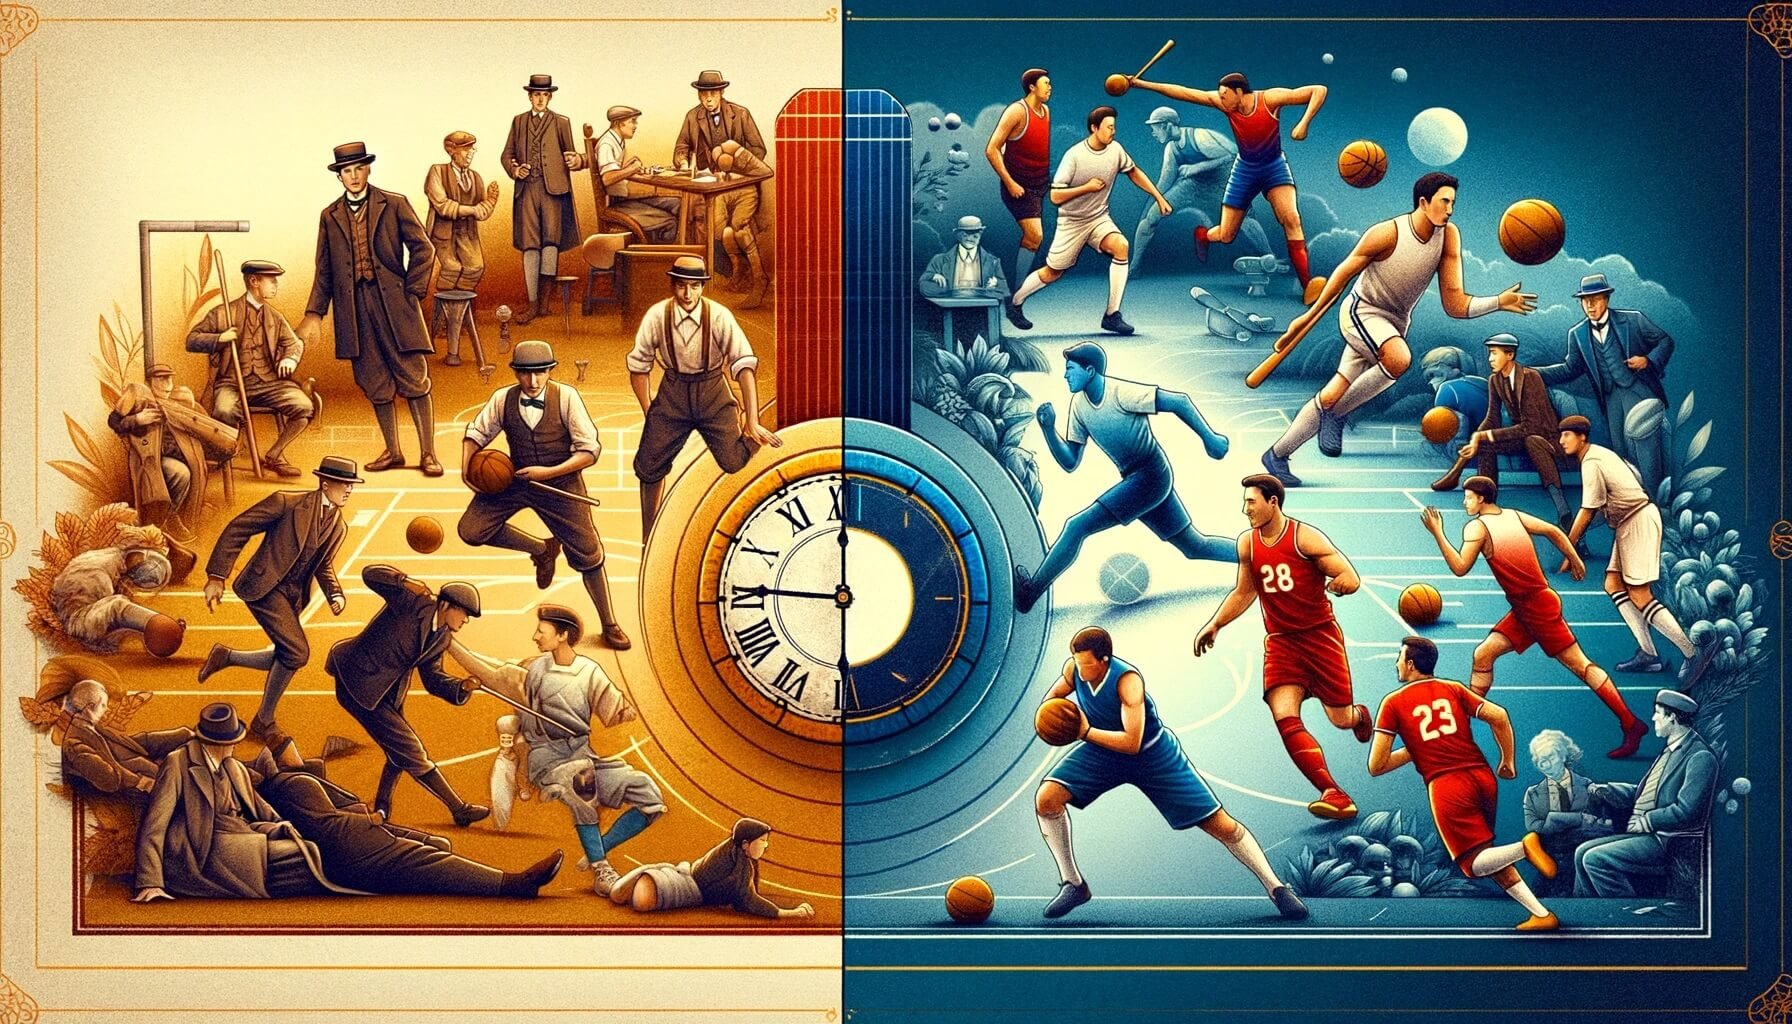 A scene comparing sports from different eras, including a clock in the middle of the image